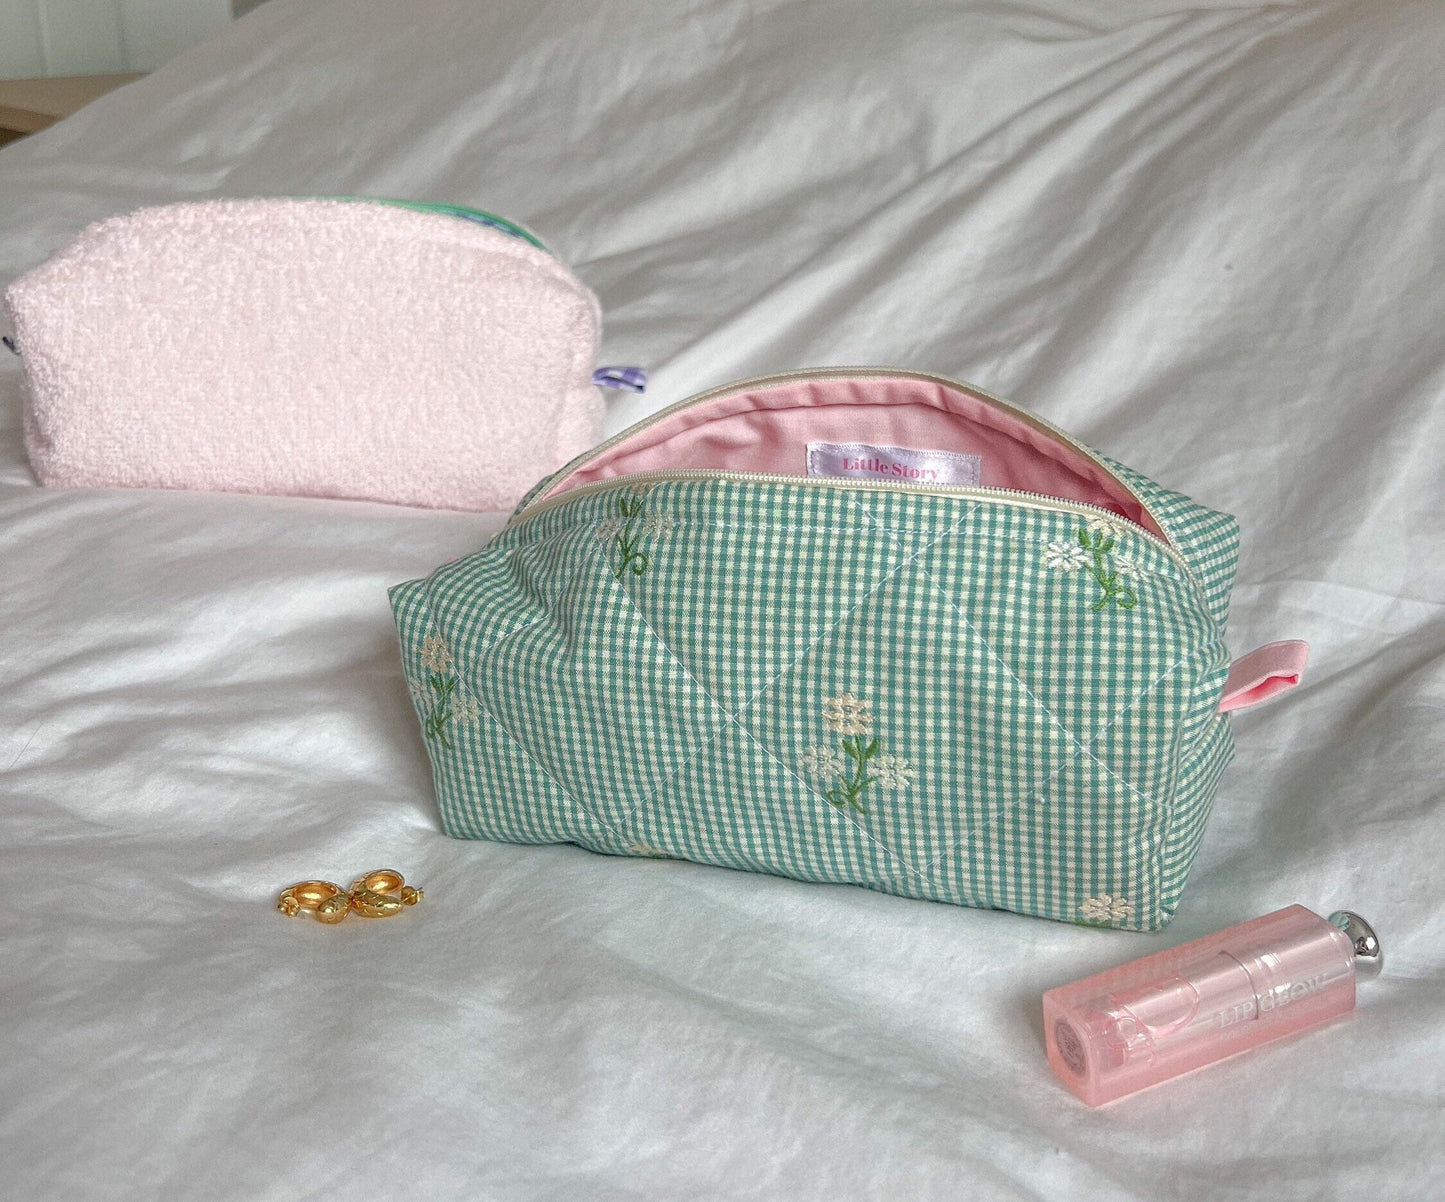 FLORAL GINGHAM BAG medium ditsy quilted cosmetic makeup bag lined green embroidered, cotton zip-up pouch, make-up brush bag handmade in U.K.